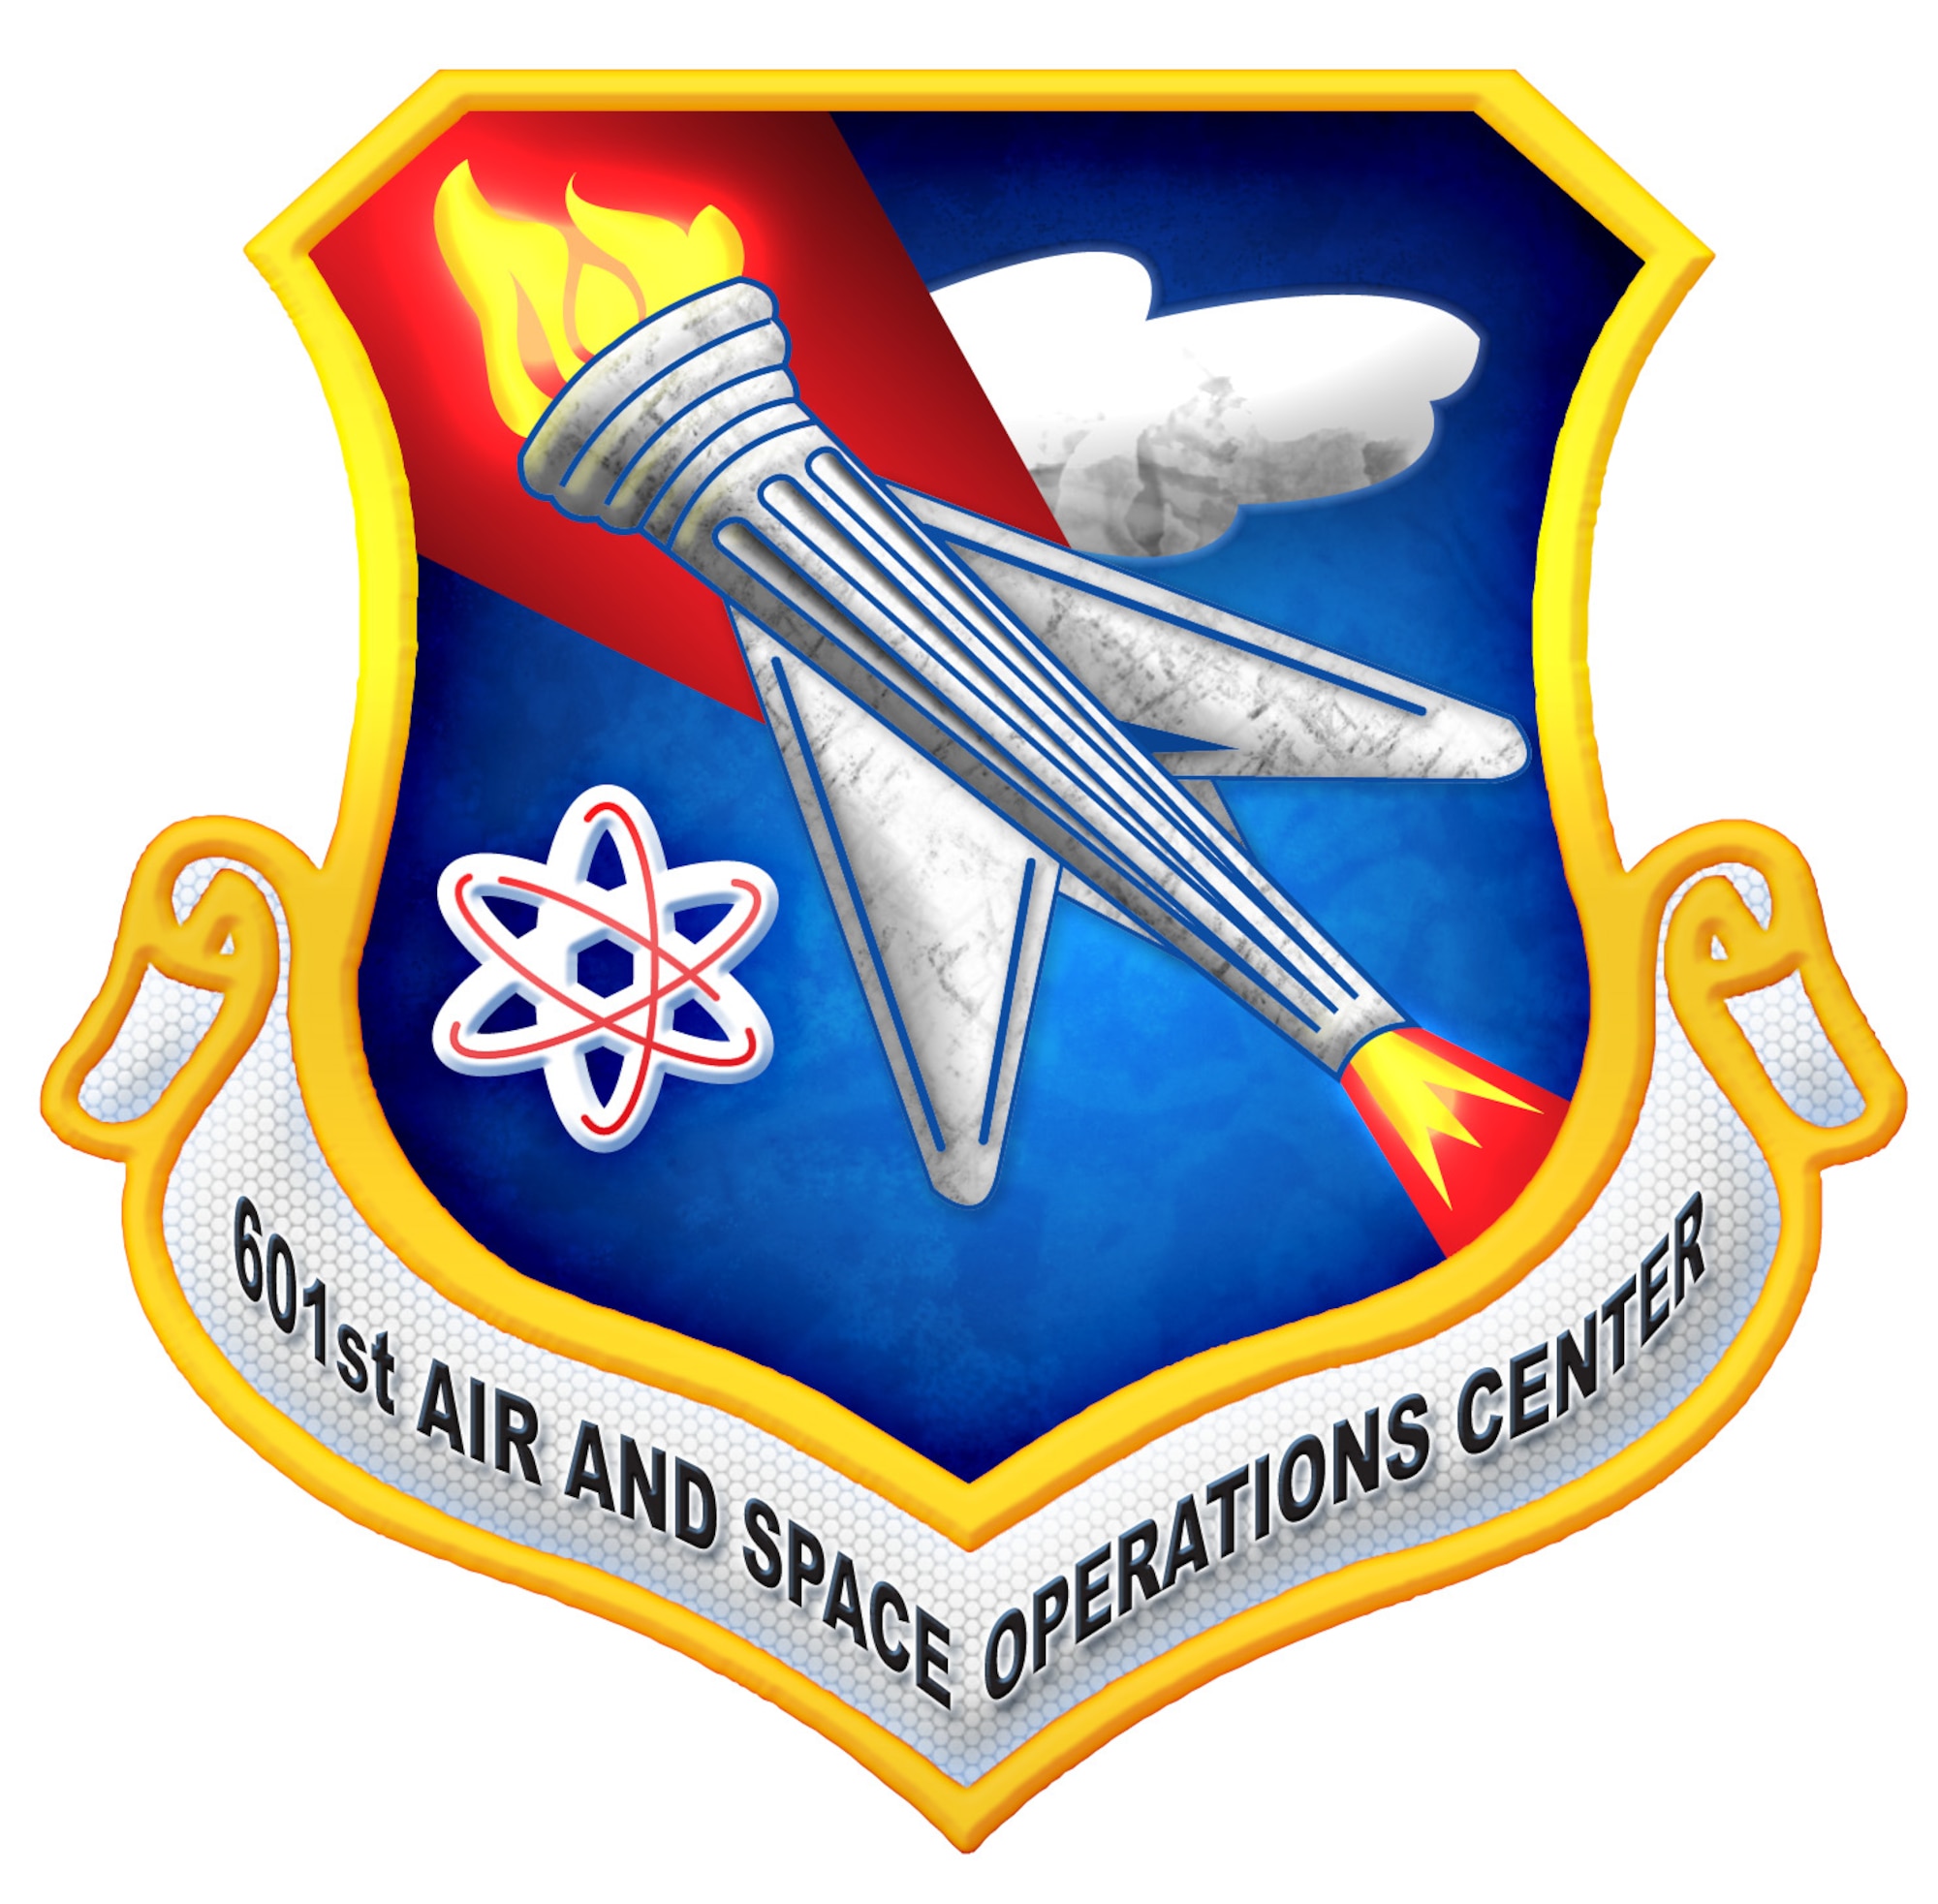 601st Air and Space Operations Center